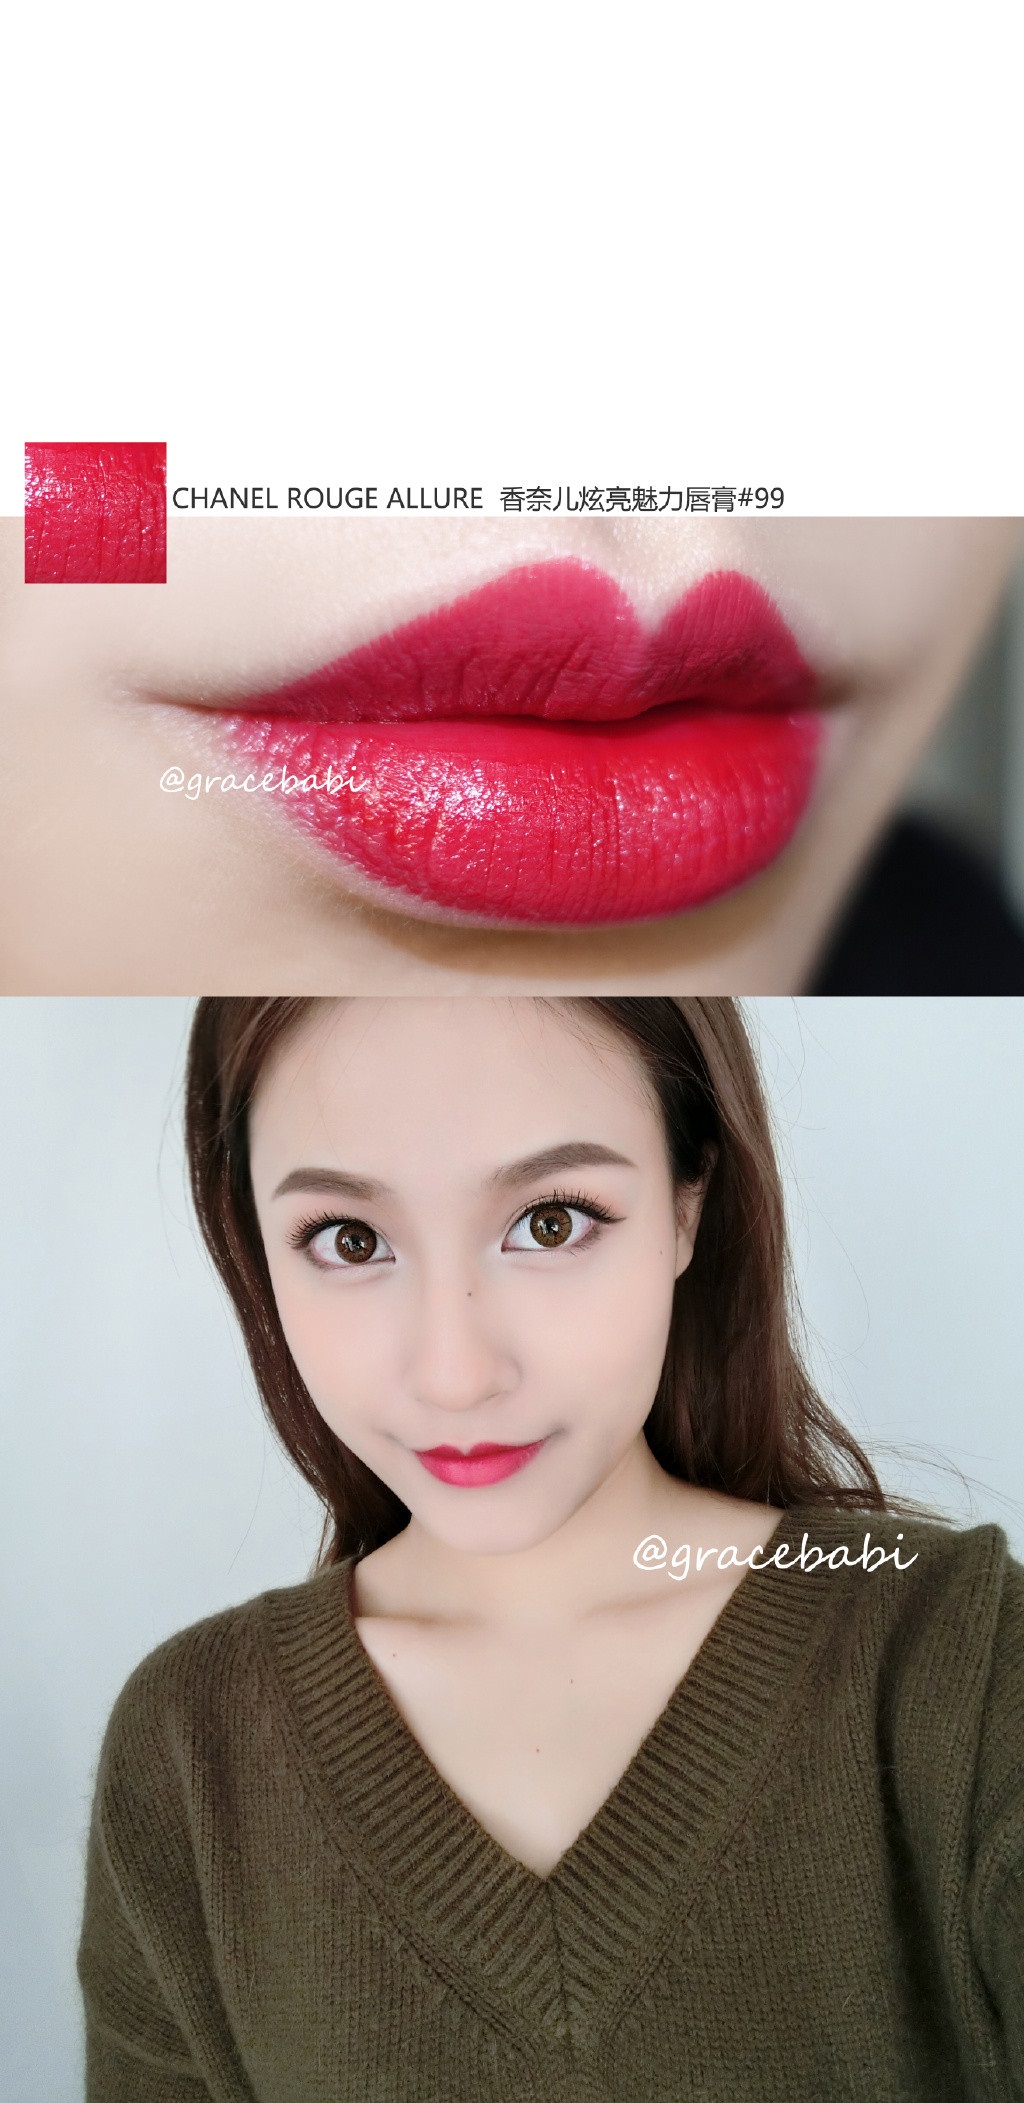 CHANEL香奈儿Rouge Coco Shine 55/56&Chanel Rouge Allure 96/99/138试色